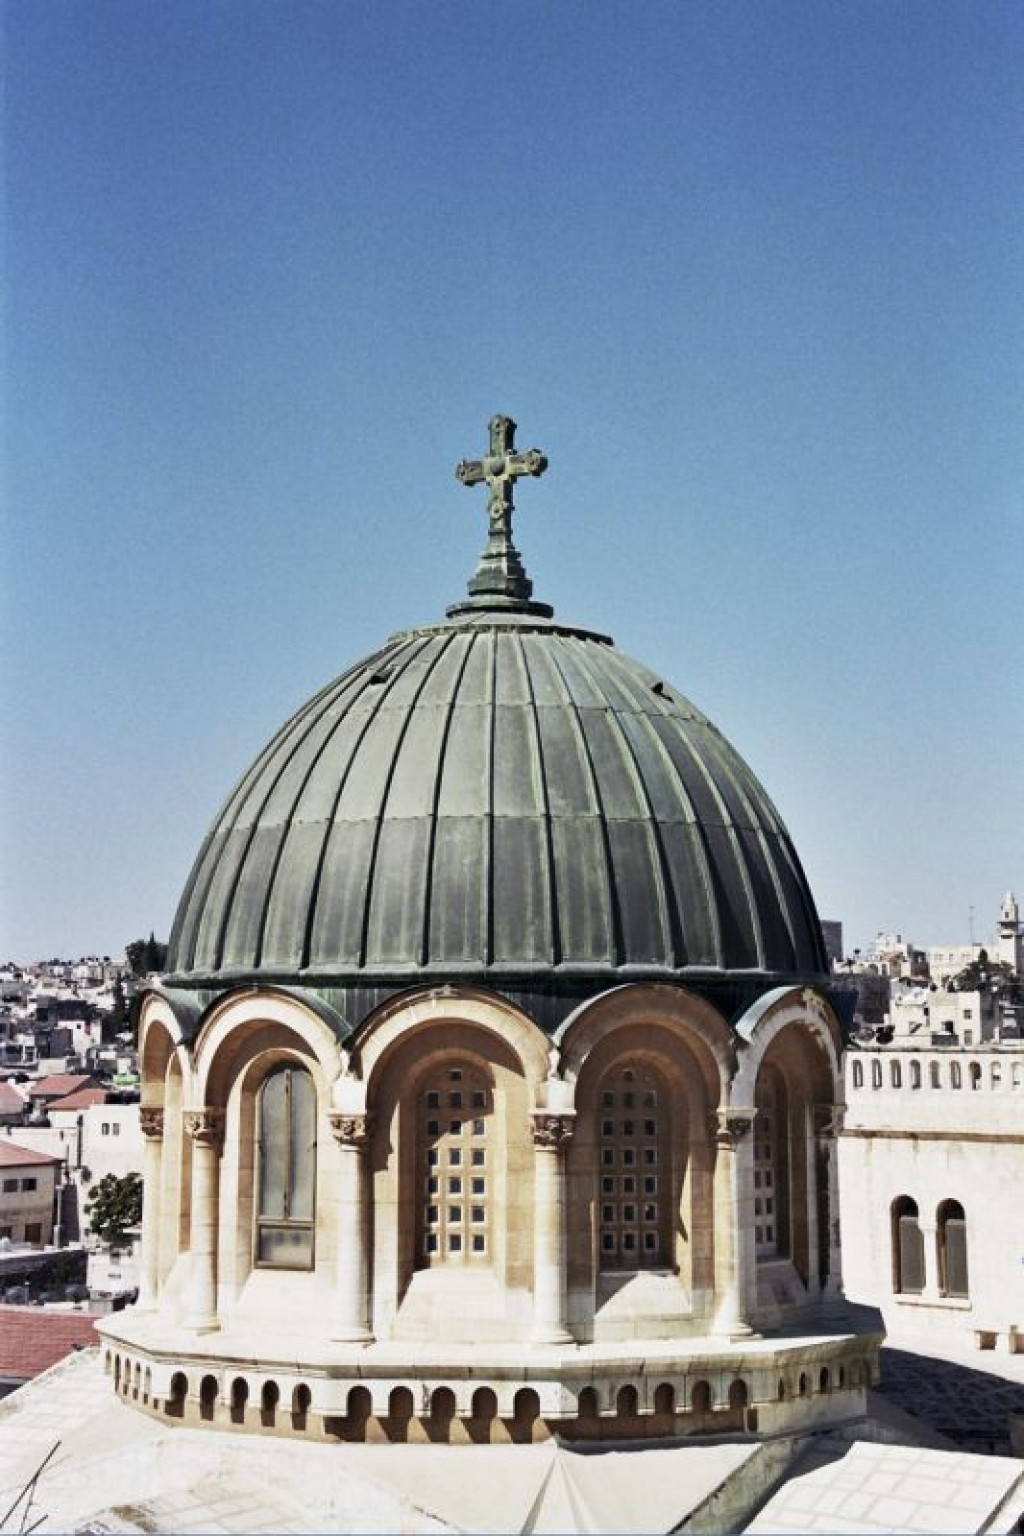 A view of the roof of Notre Dame de Zion (Home Ecce) convent